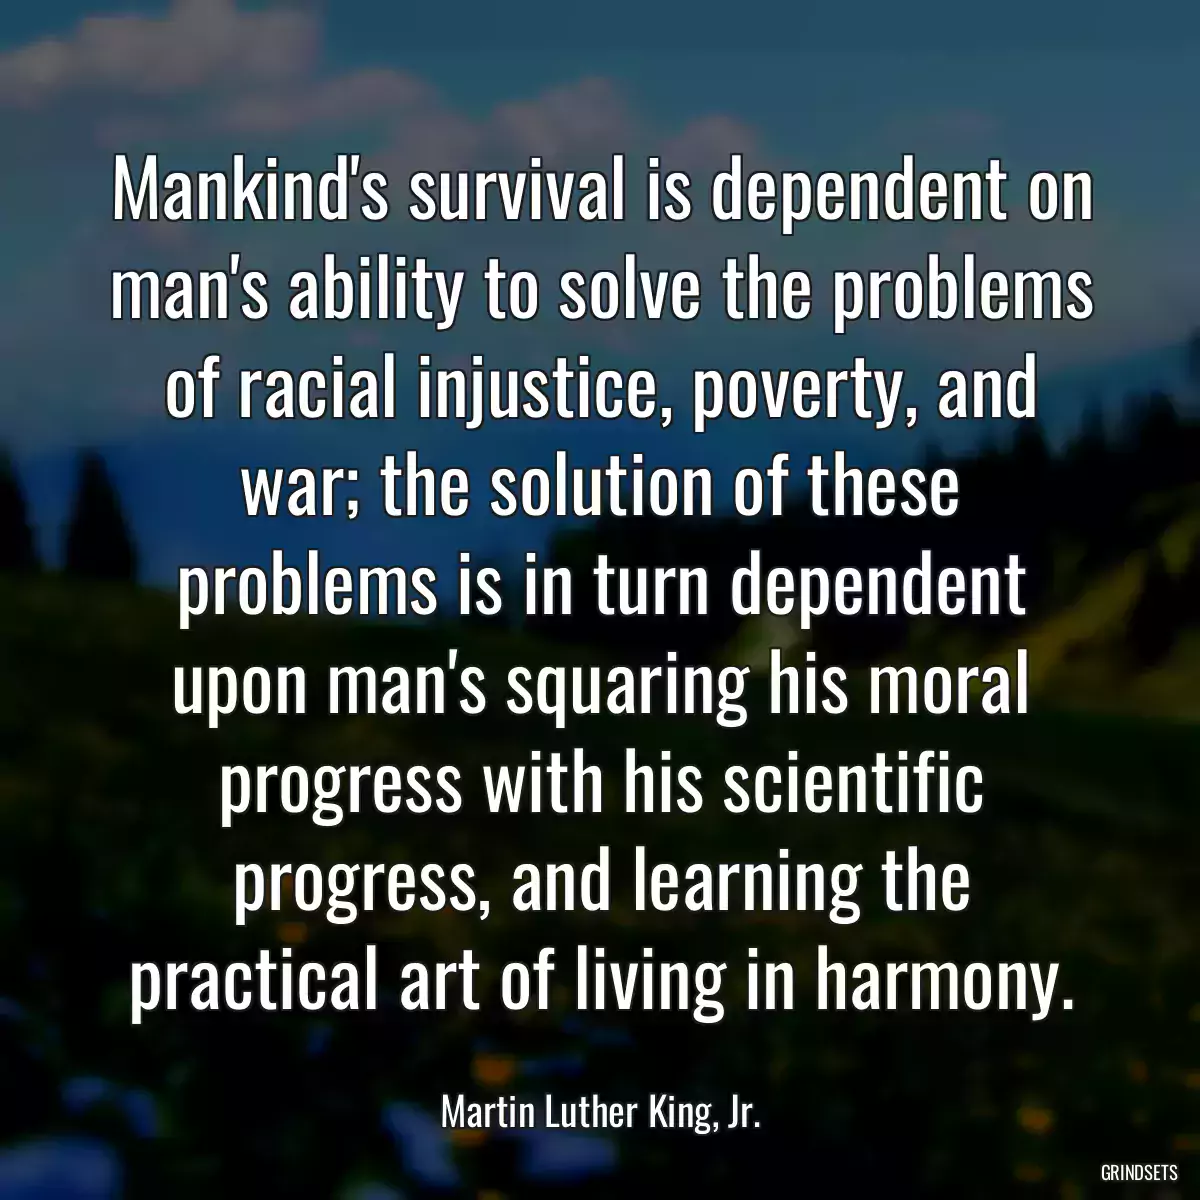 Mankind\'s survival is dependent on man\'s ability to solve the problems of racial injustice, poverty, and war; the solution of these problems is in turn dependent upon man\'s squaring his moral progress with his scientific progress, and learning the practical art of living in harmony.